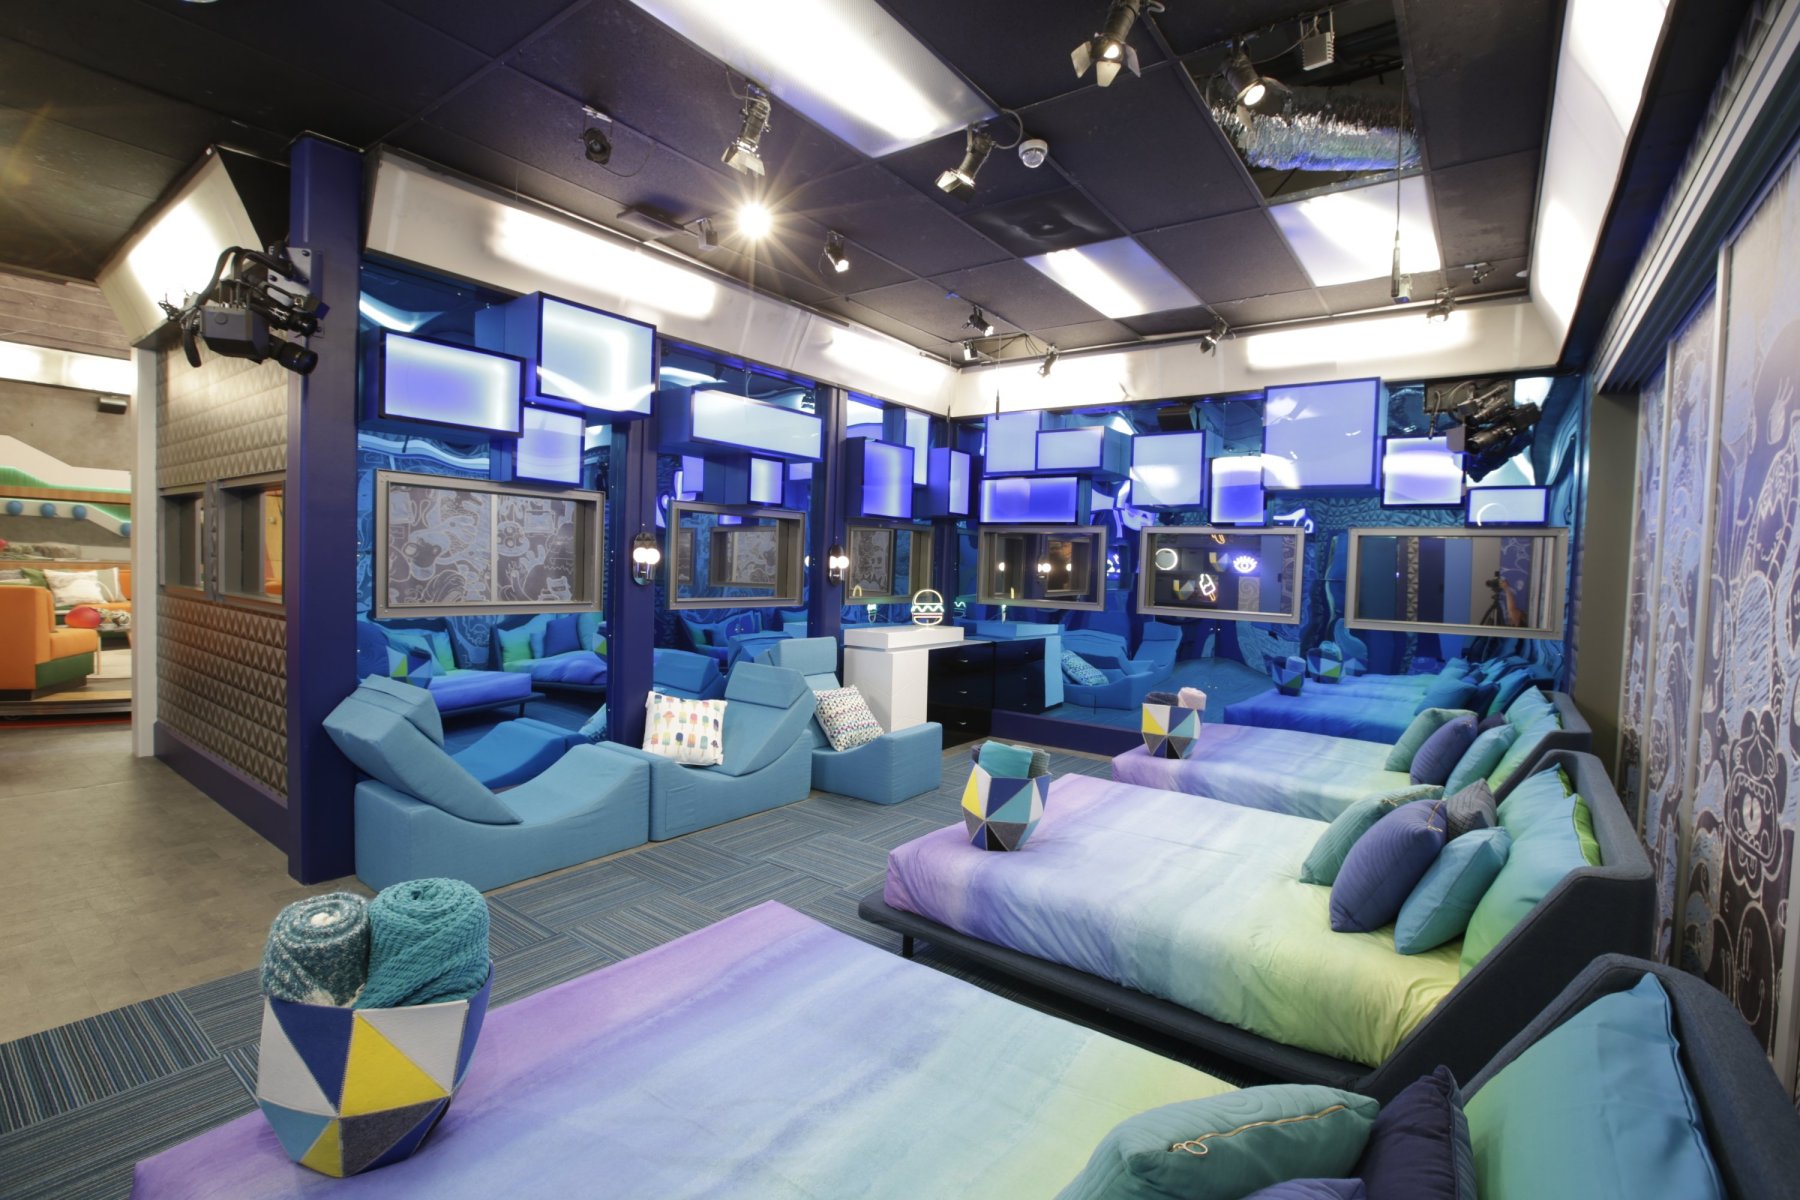 'Big Brother' Season 20 twist and house design revealed -- See the